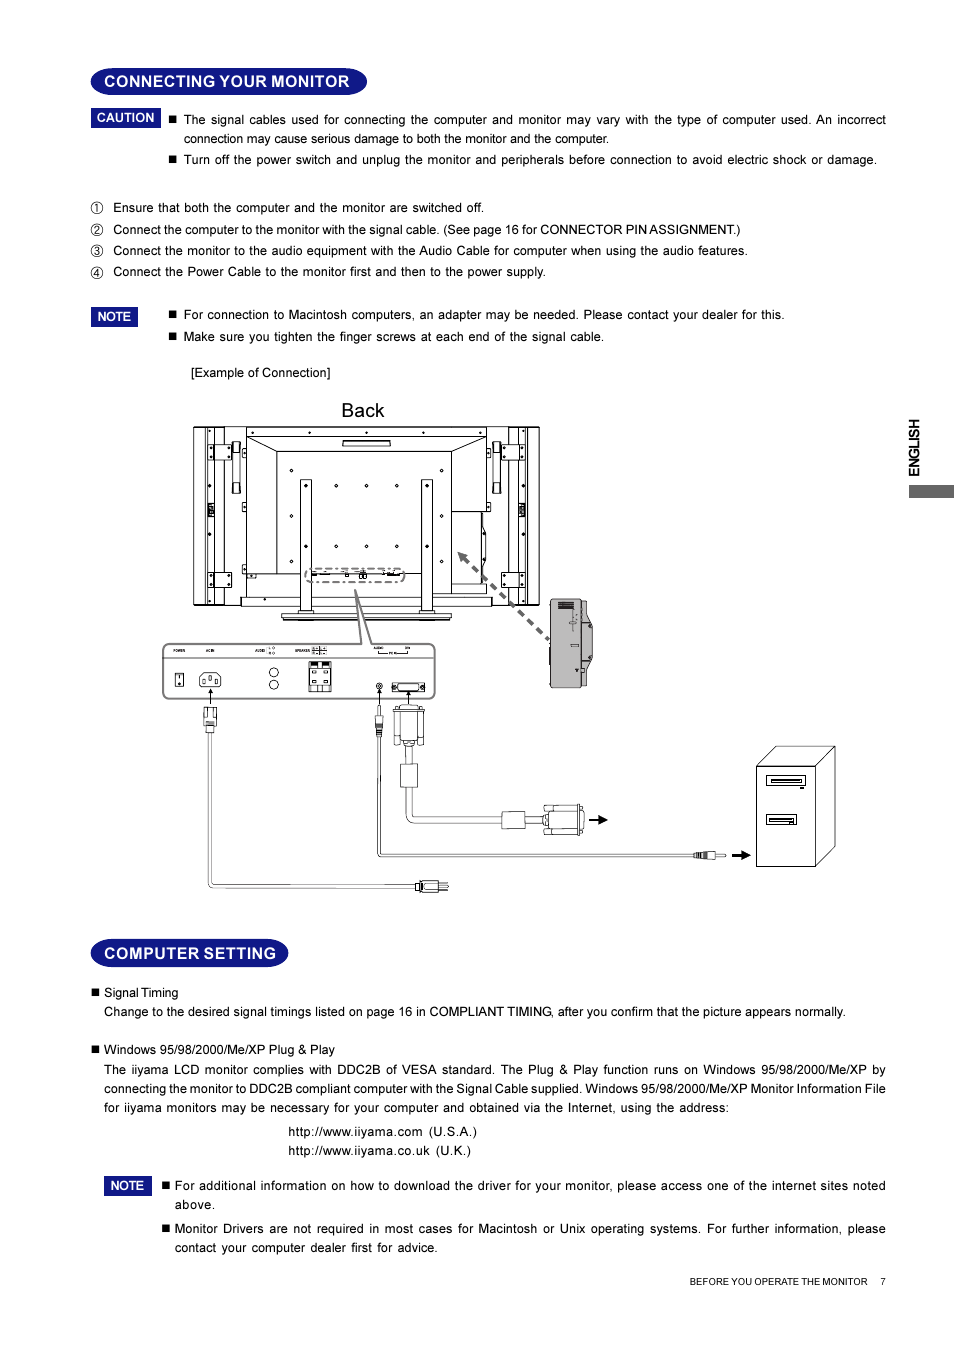 Back, Connecting your monitor, Computer setting | Iiyama L403W User Manual | Page 9 / 32